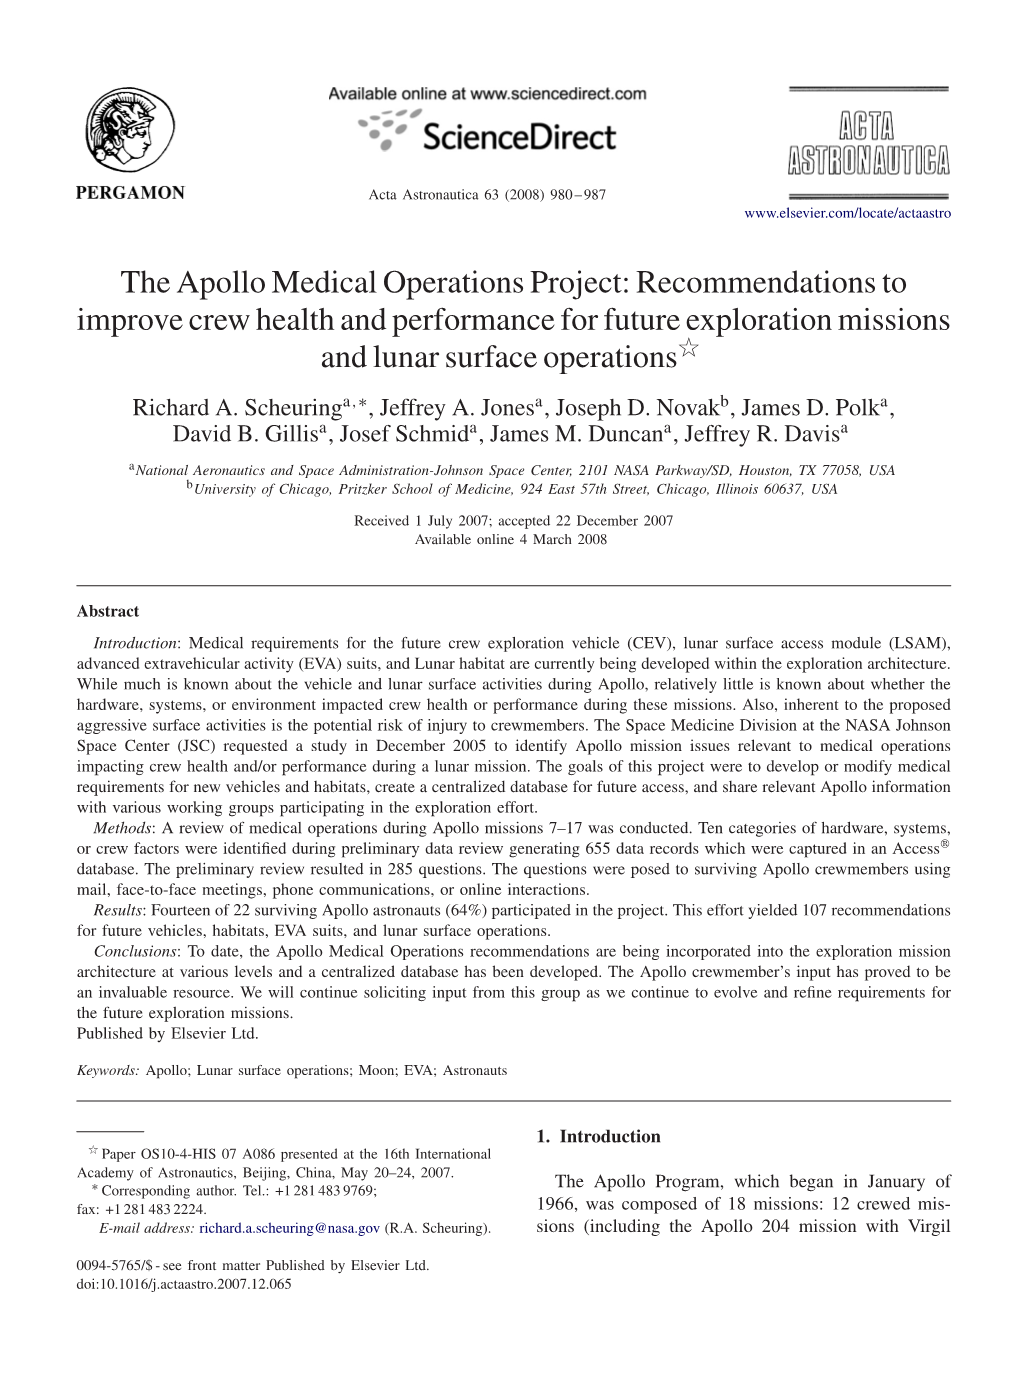 The Apollo Medical Operations Project: Recommendations to Improve Crew Health and Performance for Future Exploration Missions and Lunar Surface Operationsଁ Richard A